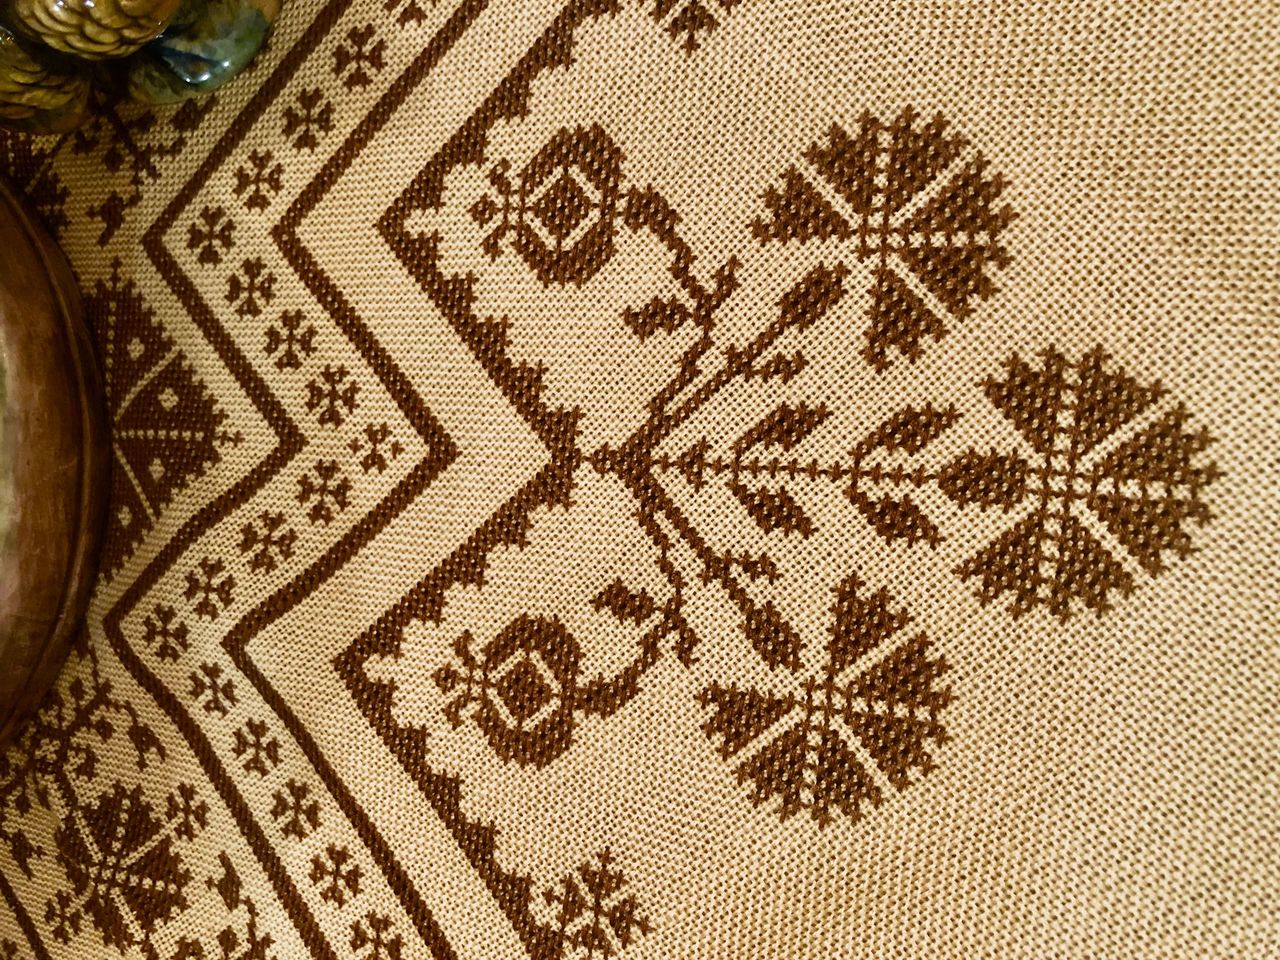 A brown cross-stitched tablecloth